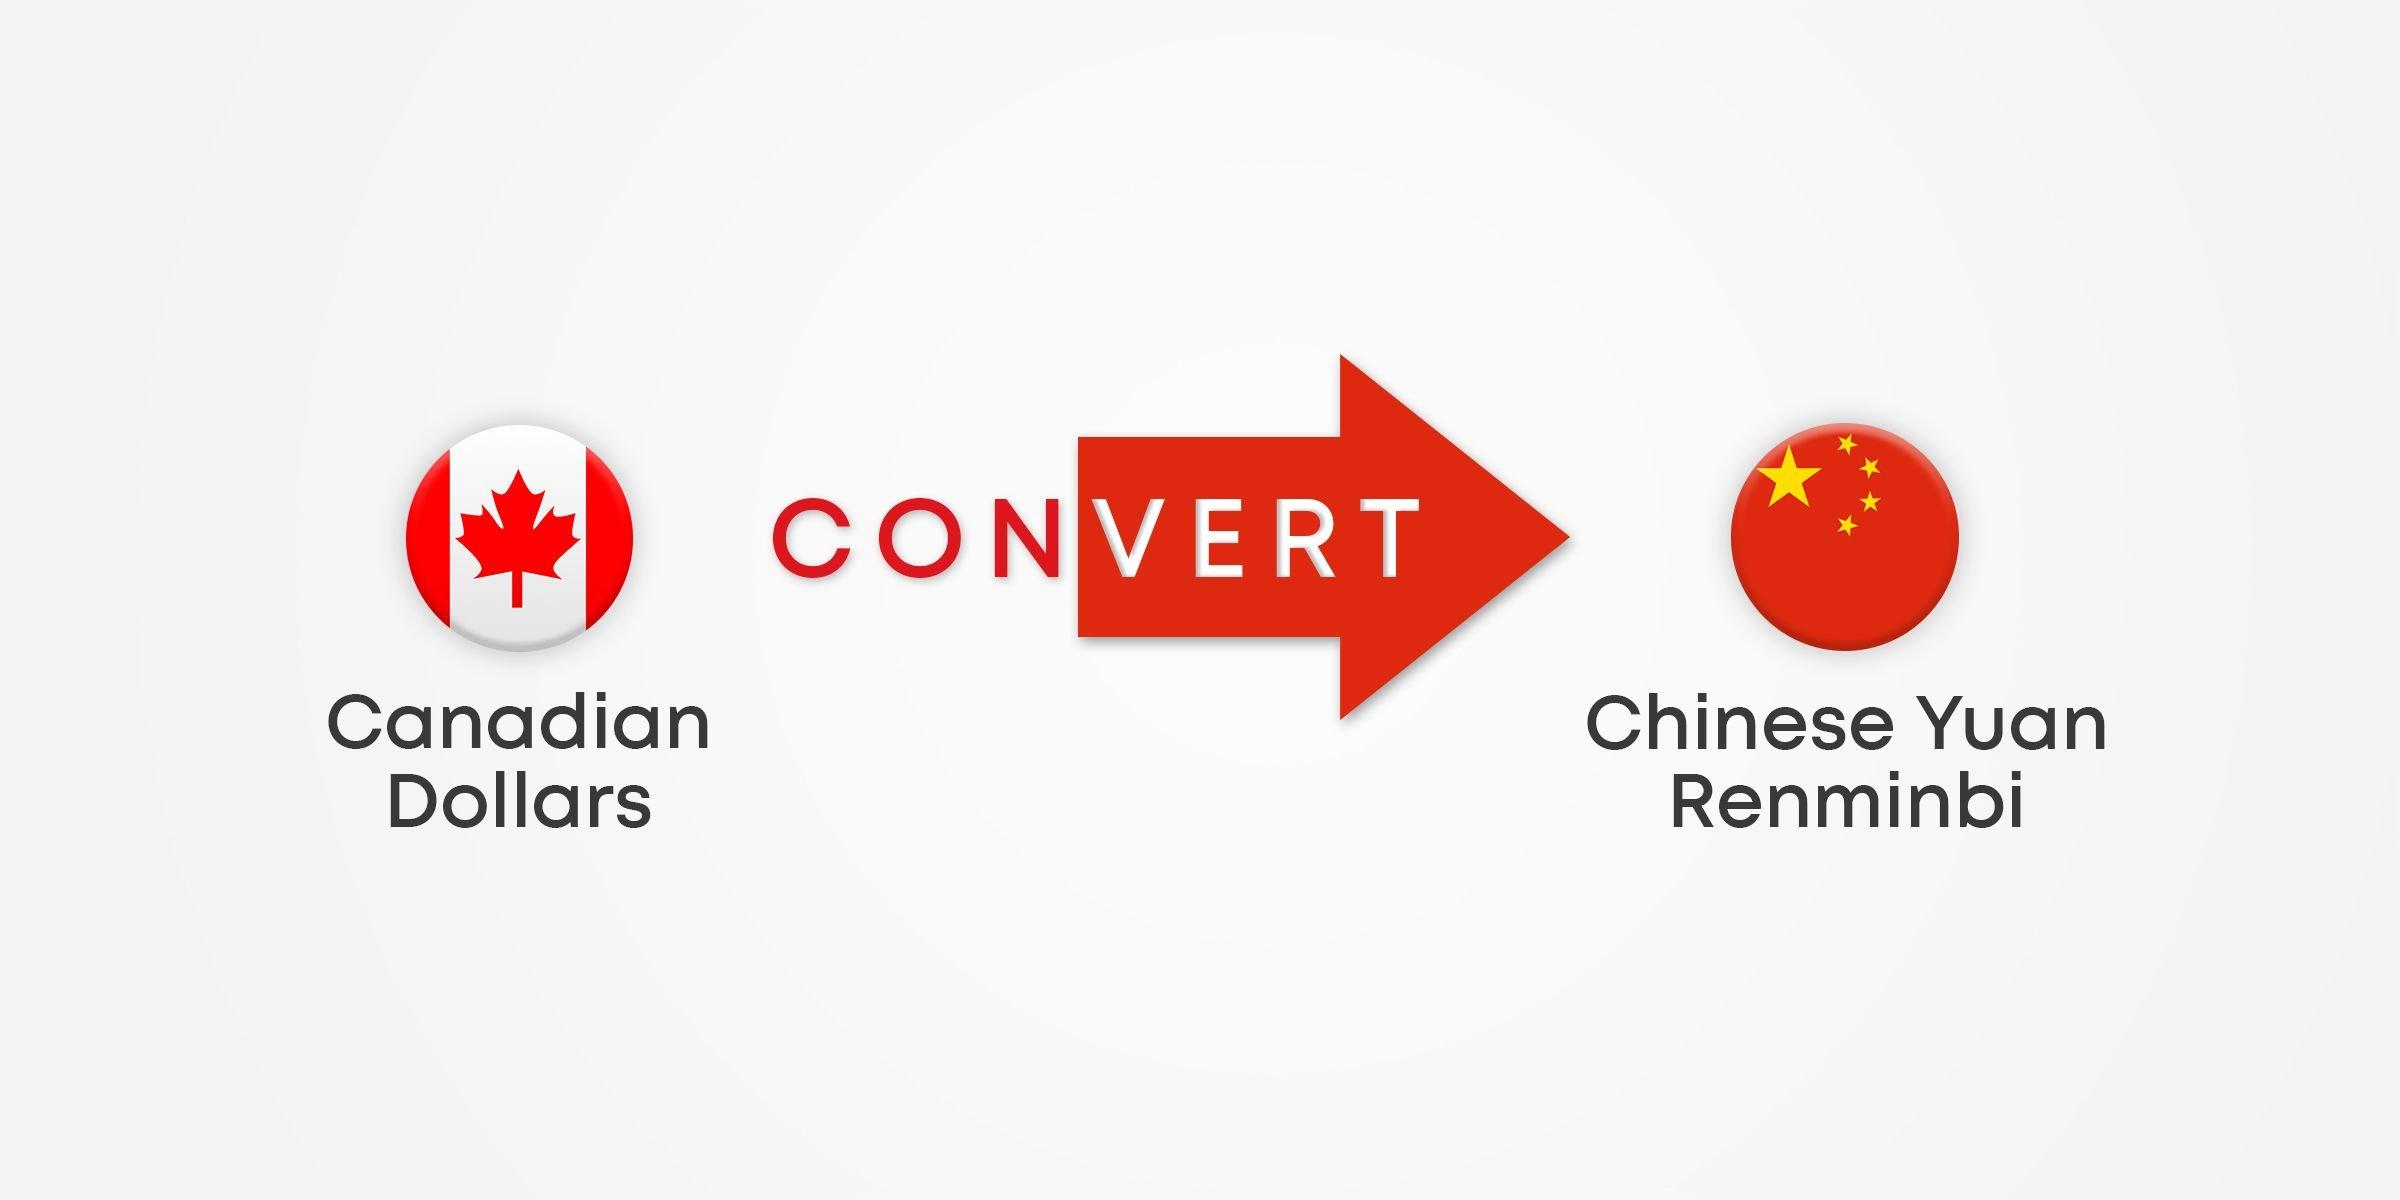 How to Convert your Canadian Dollars to Chinese Yuan Renminbi?